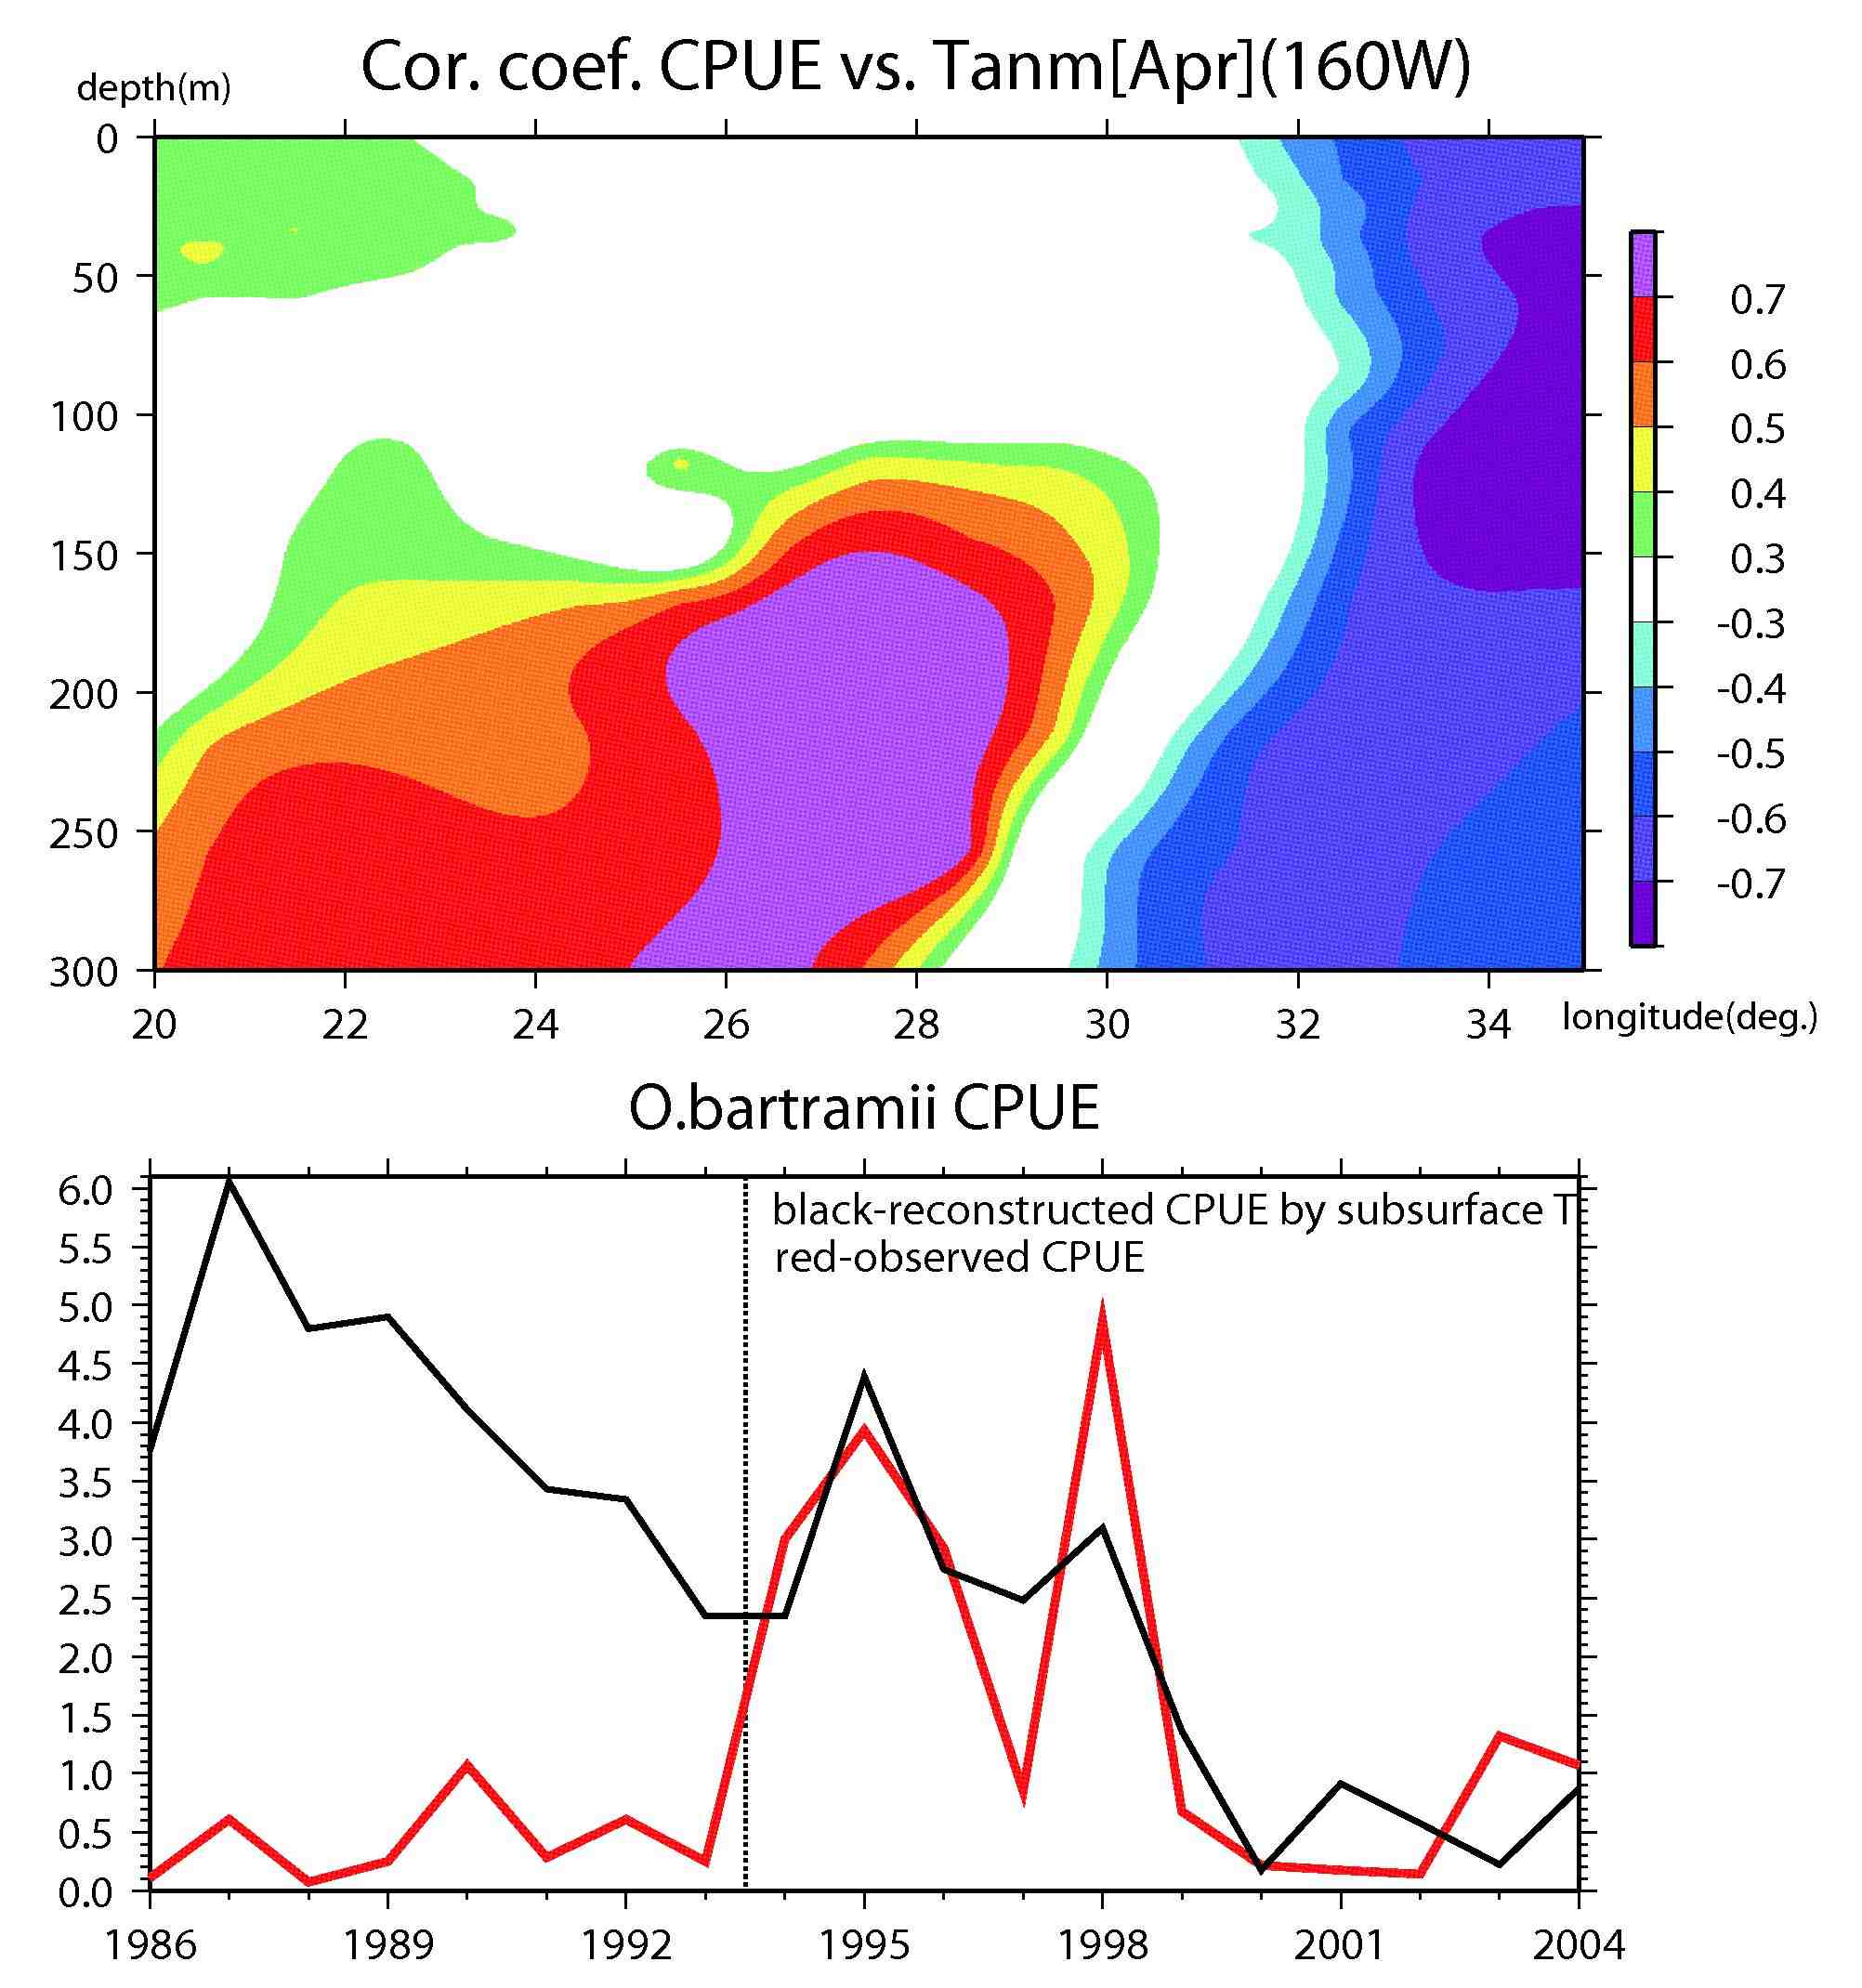 Figure4. Vertical profile of correlation coefficients between the neon flying squid CPUE and thermocline temperature anomalies along 160W (upper), and the estimated squid CPUE time sequences derived by regression analysis with subsurface temperatures (lower).